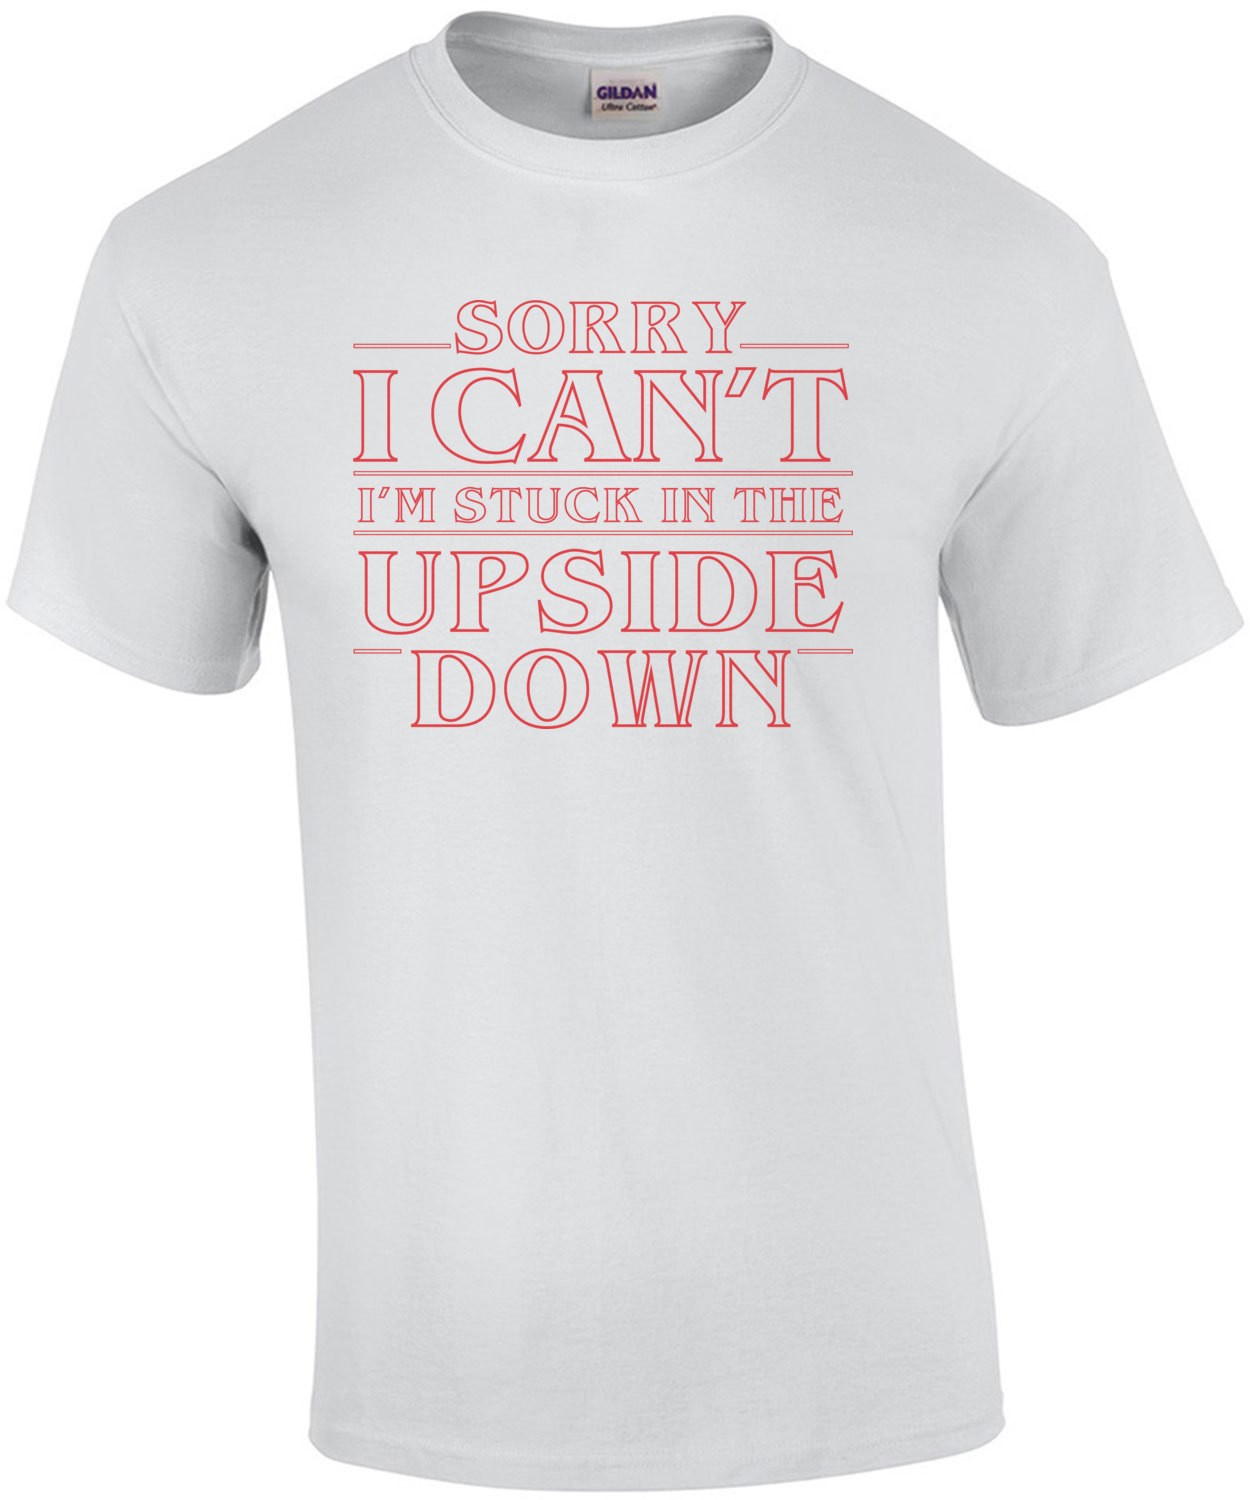 Sorry I can't I'm stuck in the upside down - stranger things t-shirt